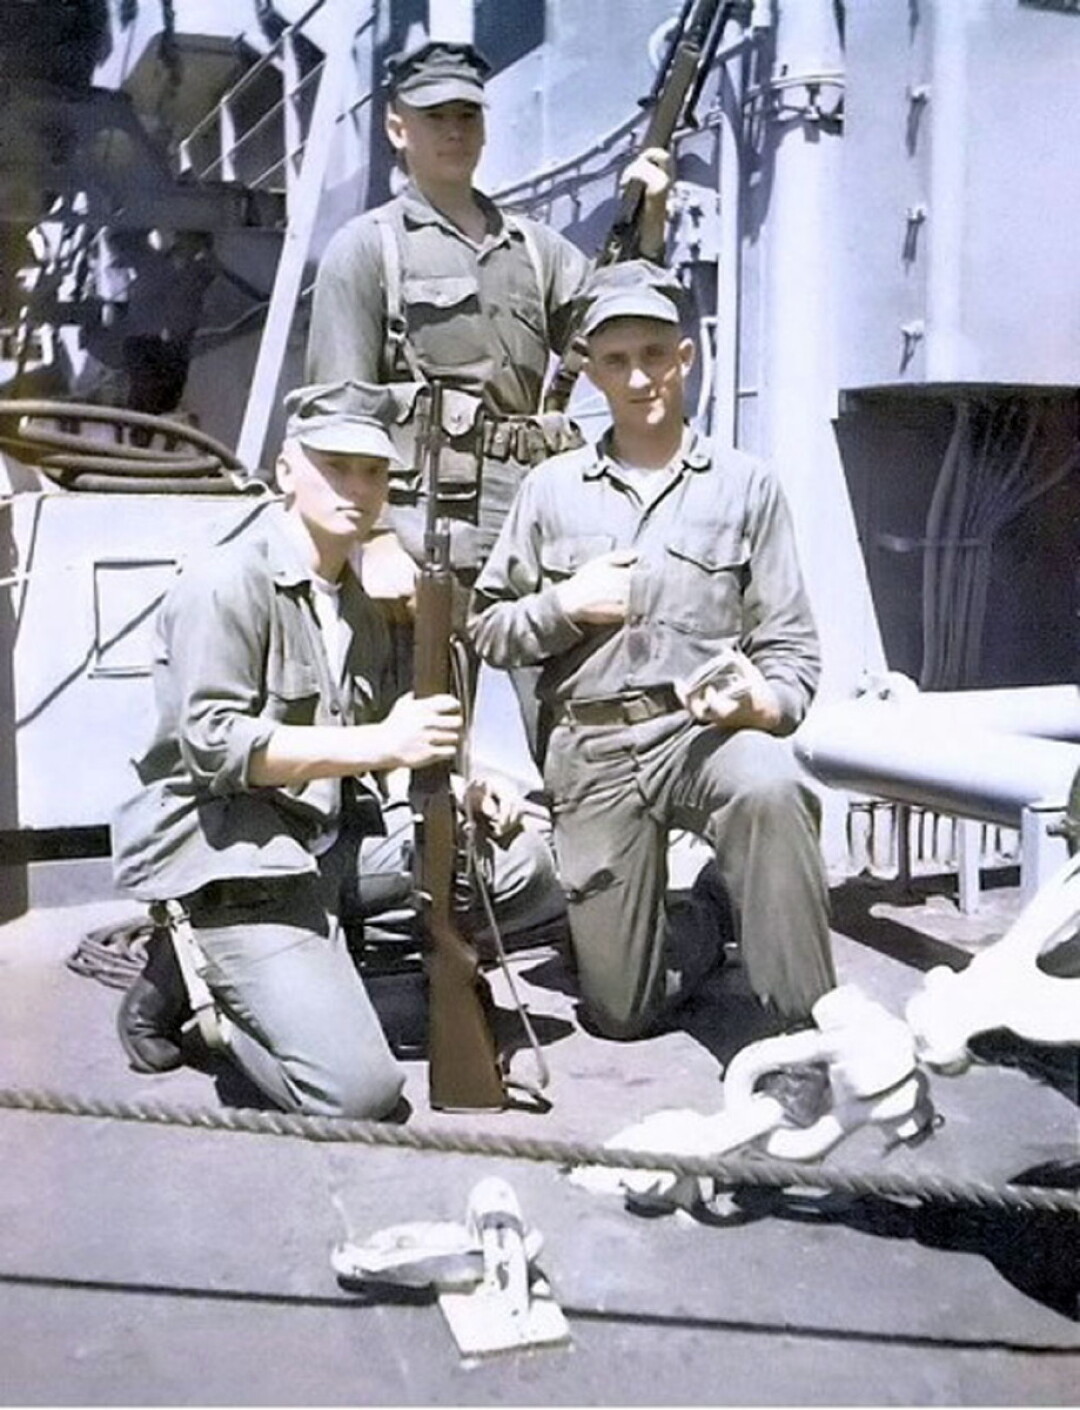 Marine Pfc. David Dola (back), shown during his service in Vietnam, won the Silver Star for gallantry in combat.